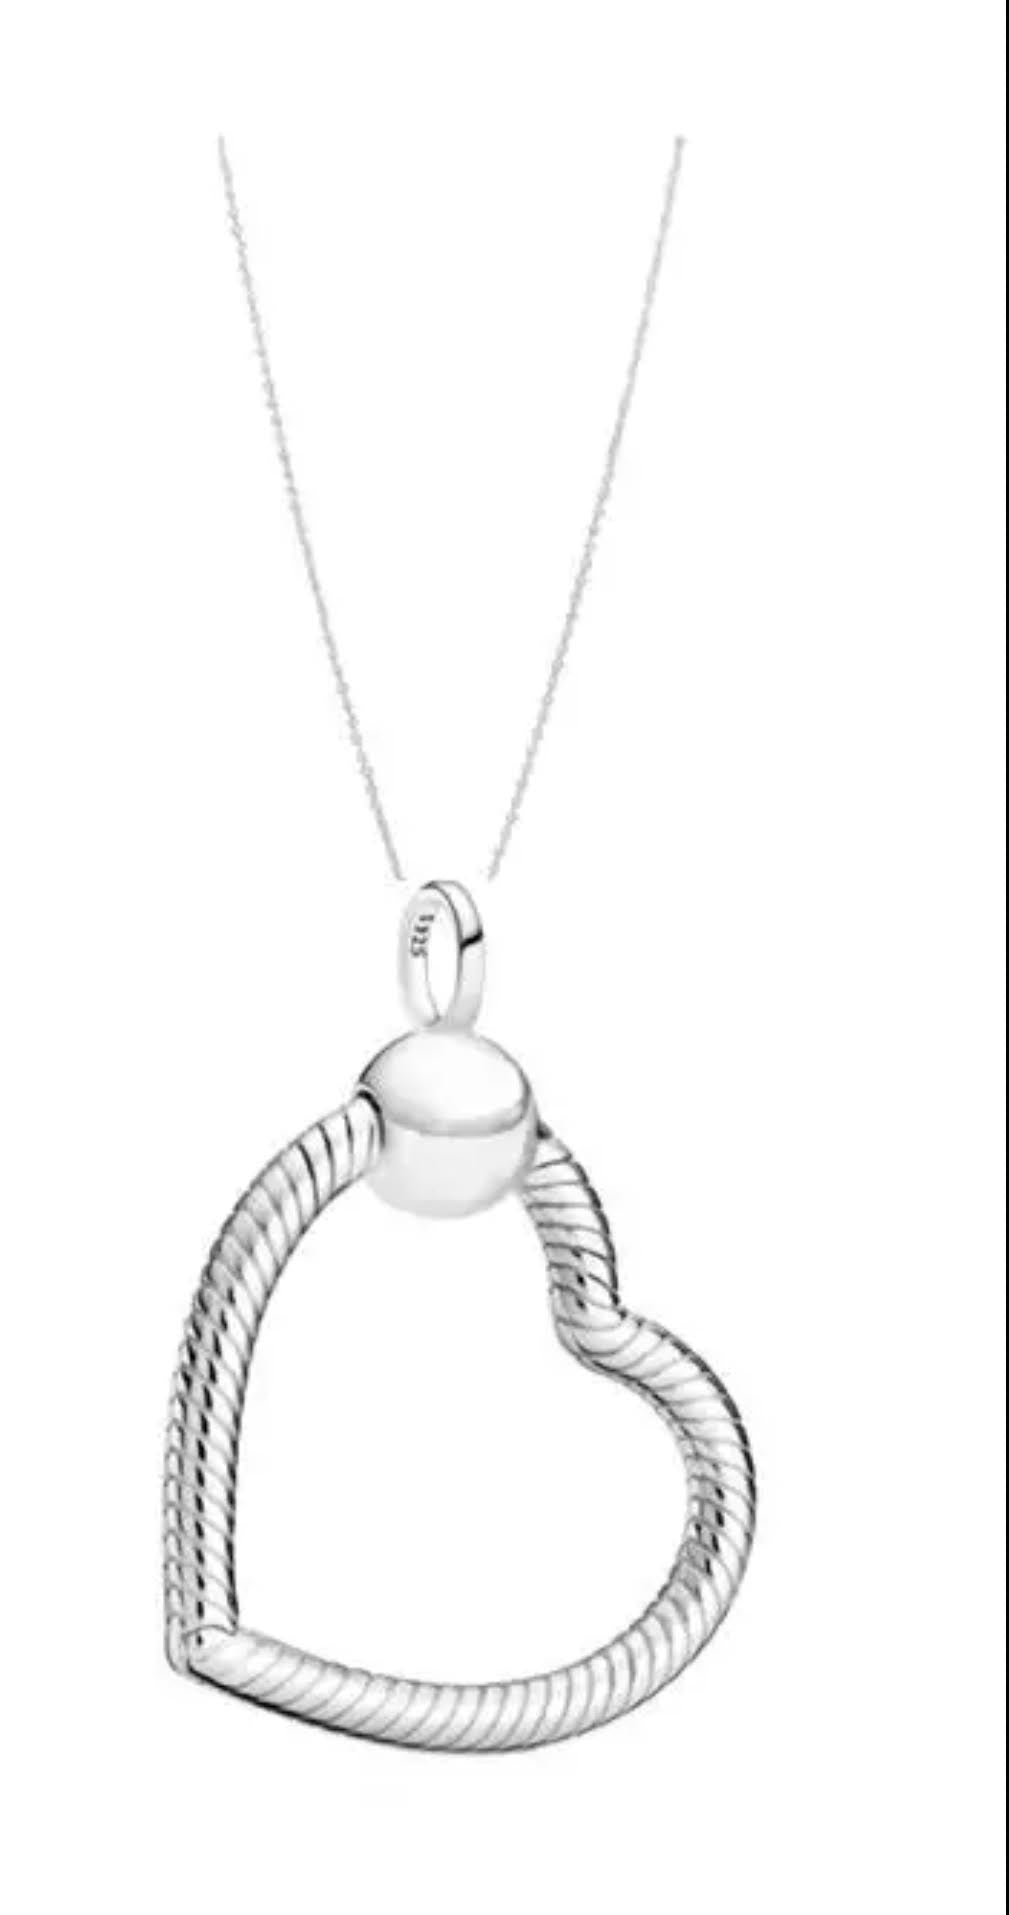 Snake Chain Style Heart or O-Shaped Pendant Necklace!